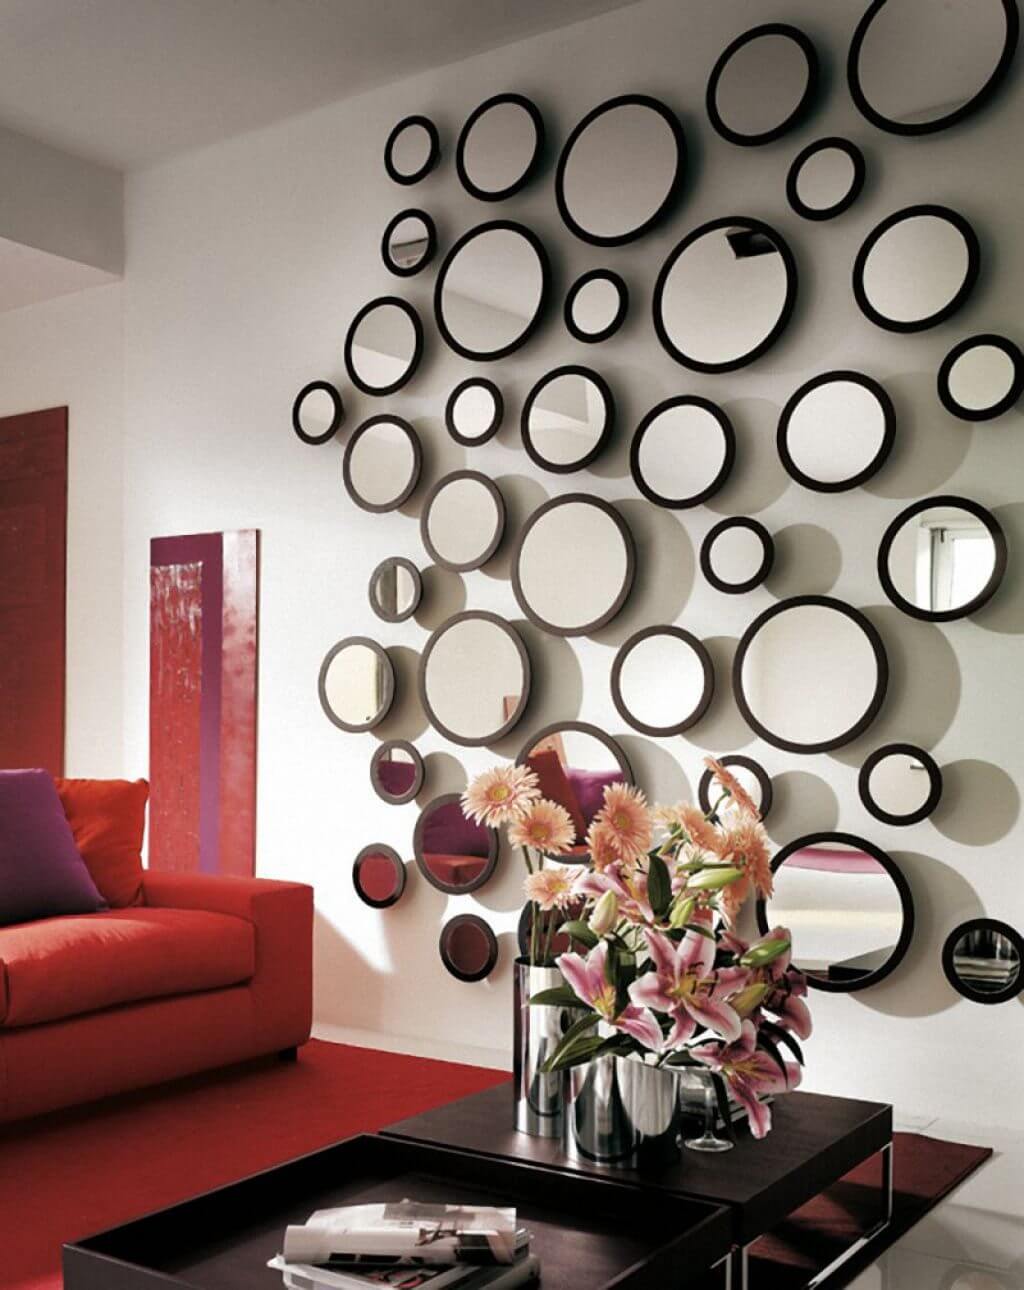 Playful Accent Wall of Round Mirrors